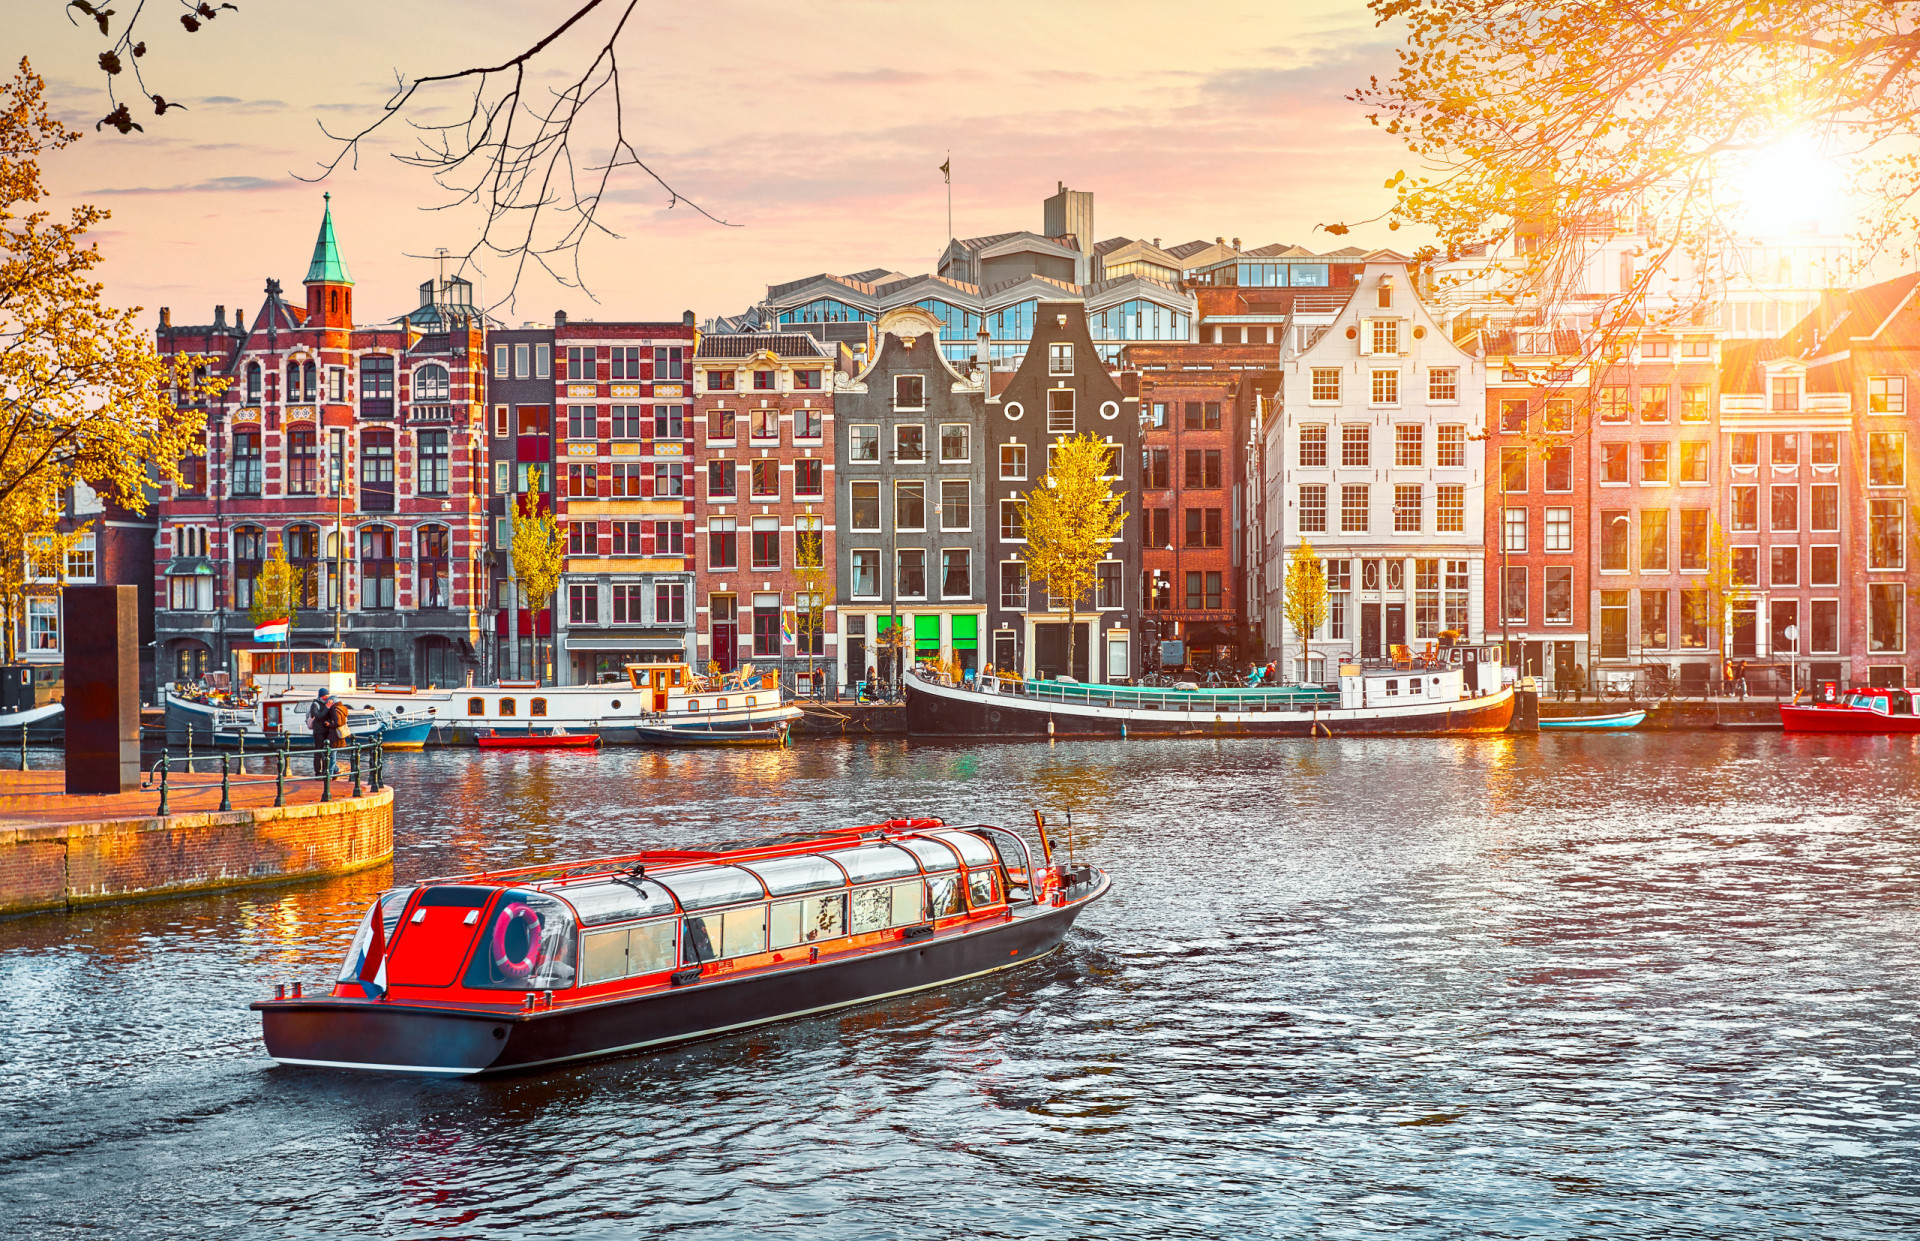 <p>Amsterdam has an overnight tourist tax of 12.5%, making it one of the most expensive in Europe. Furthermore, the city has a tax specific to transit visitors, including people on cruise ships, that charges €14 (US$15.26) per 24-hour period.</p><p>You may also like:<a href="https://www.starsinsider.com/n/392625?utm_source=msn.com&utm_medium=display&utm_campaign=referral_description&utm_content=683481en-my"> Stunning nature photographs that look like paintings</a></p>